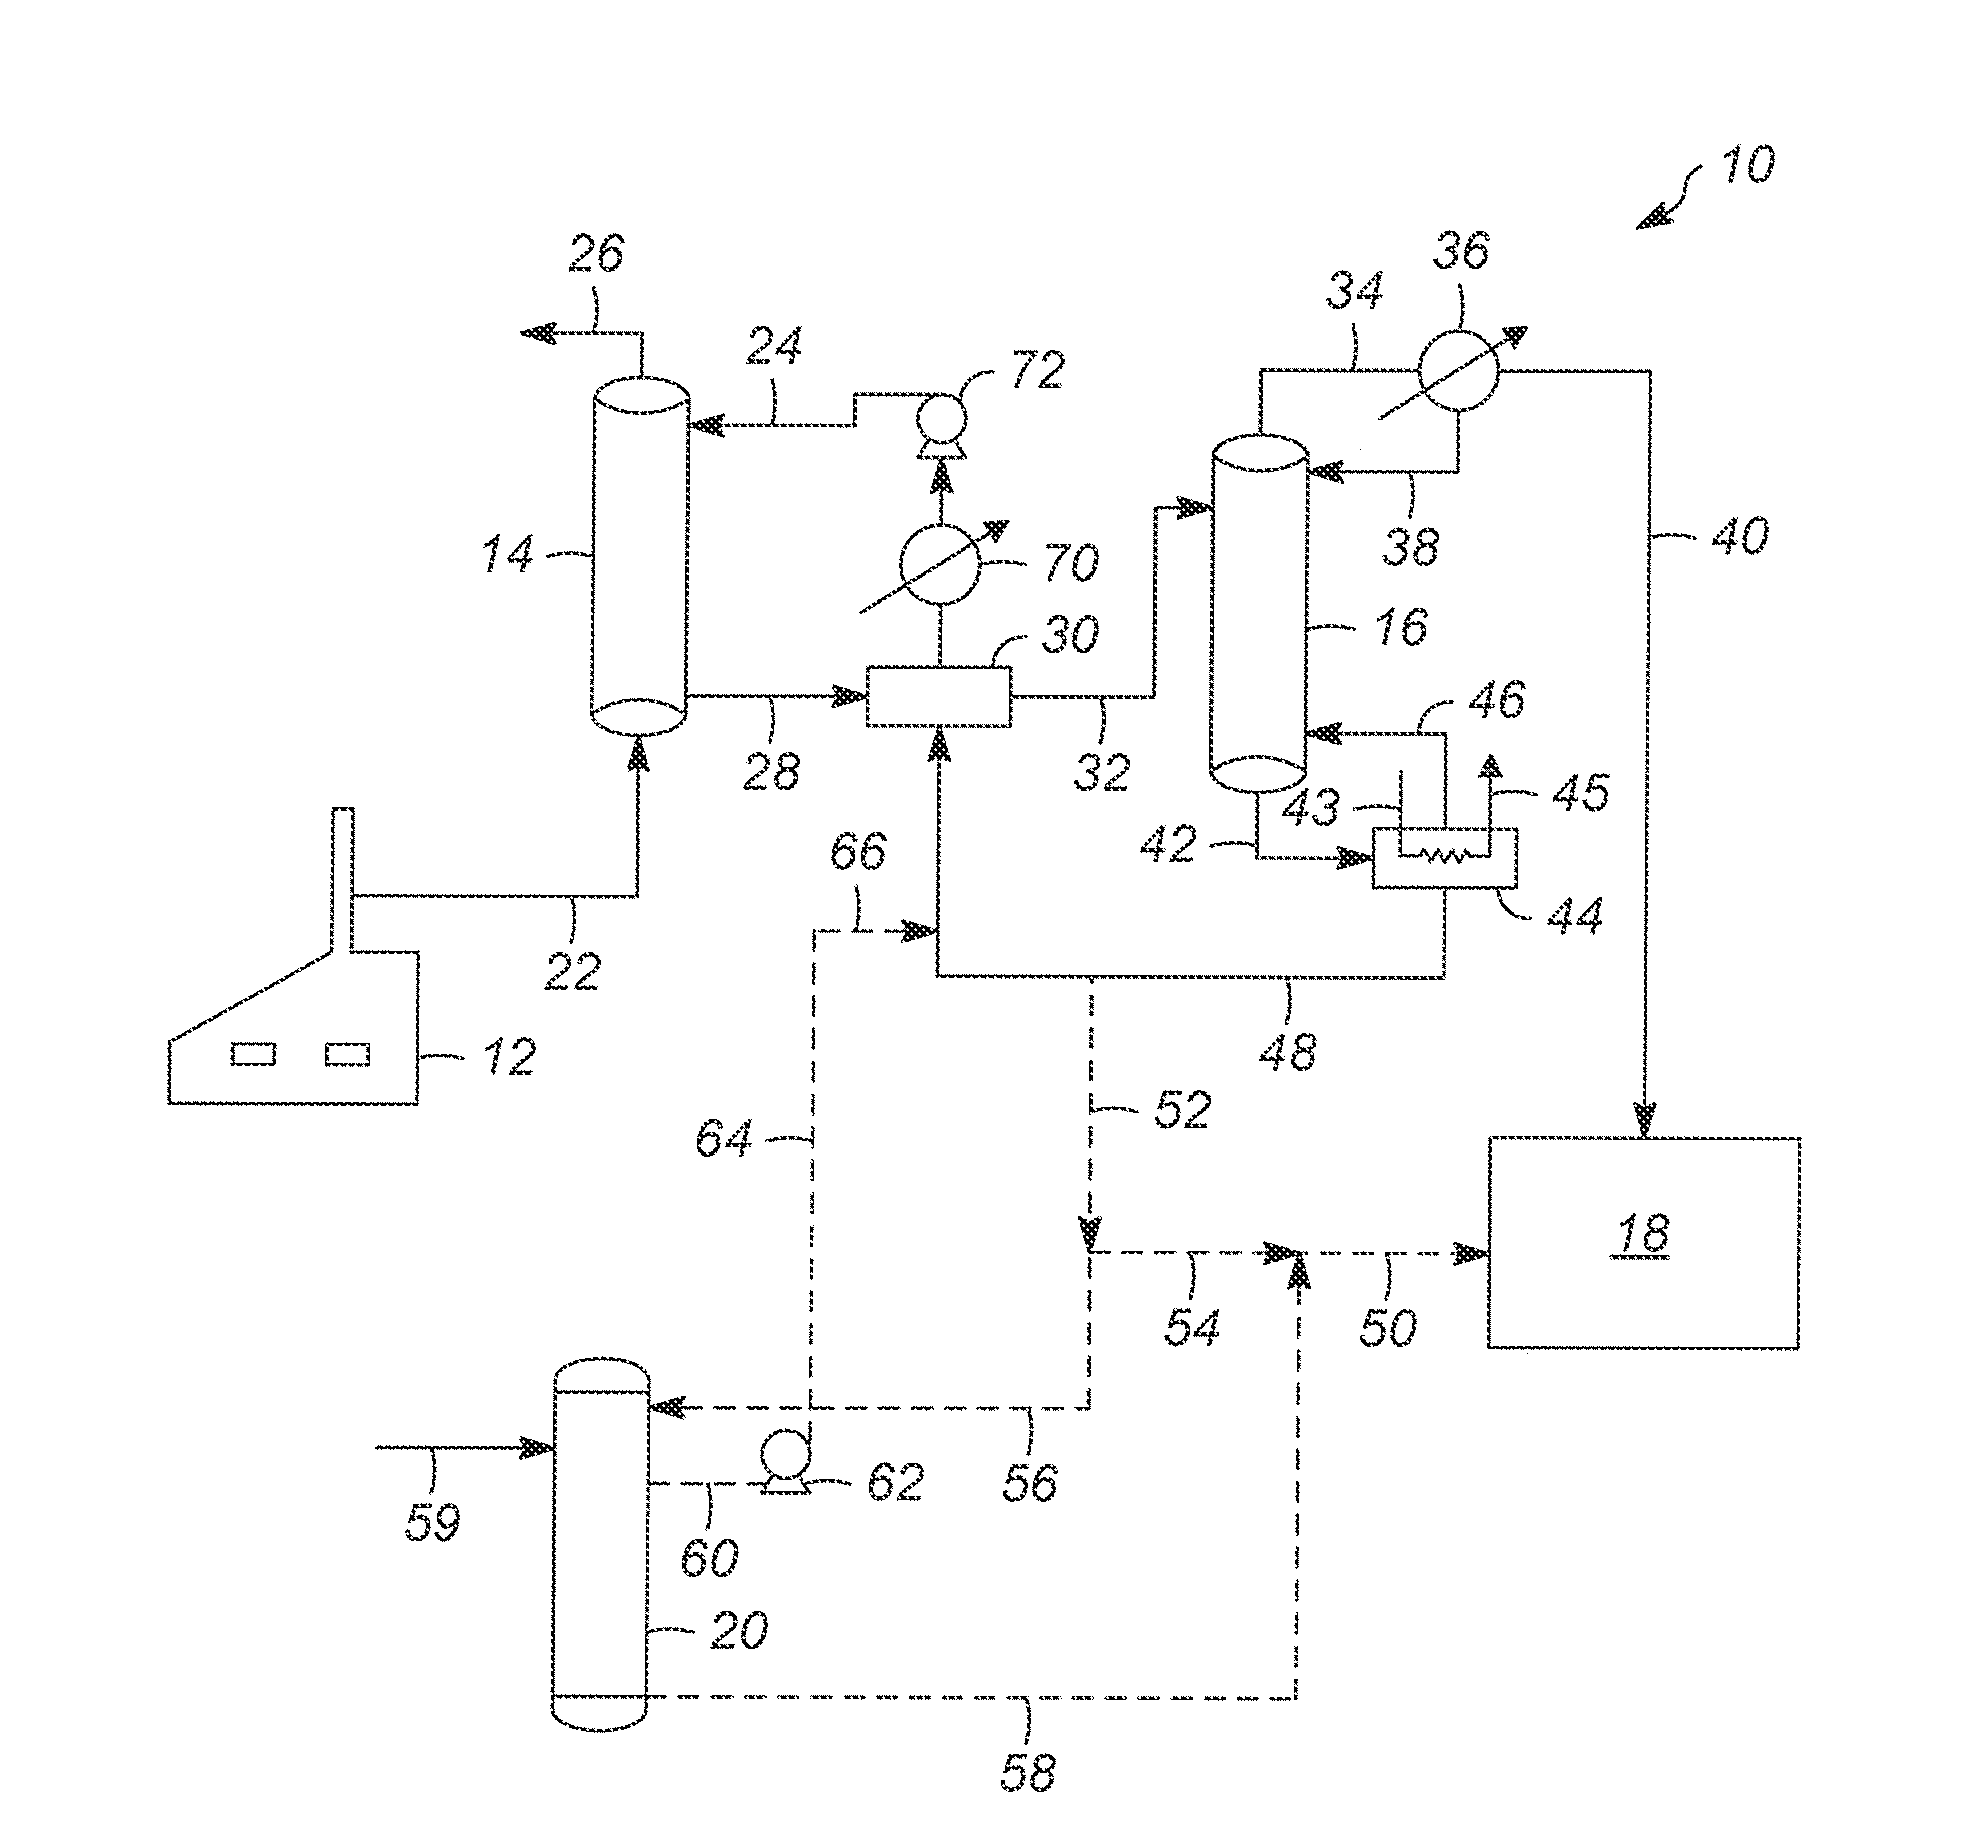 Processes and systems for discharging amine byproducts formed in an amine-based solvent